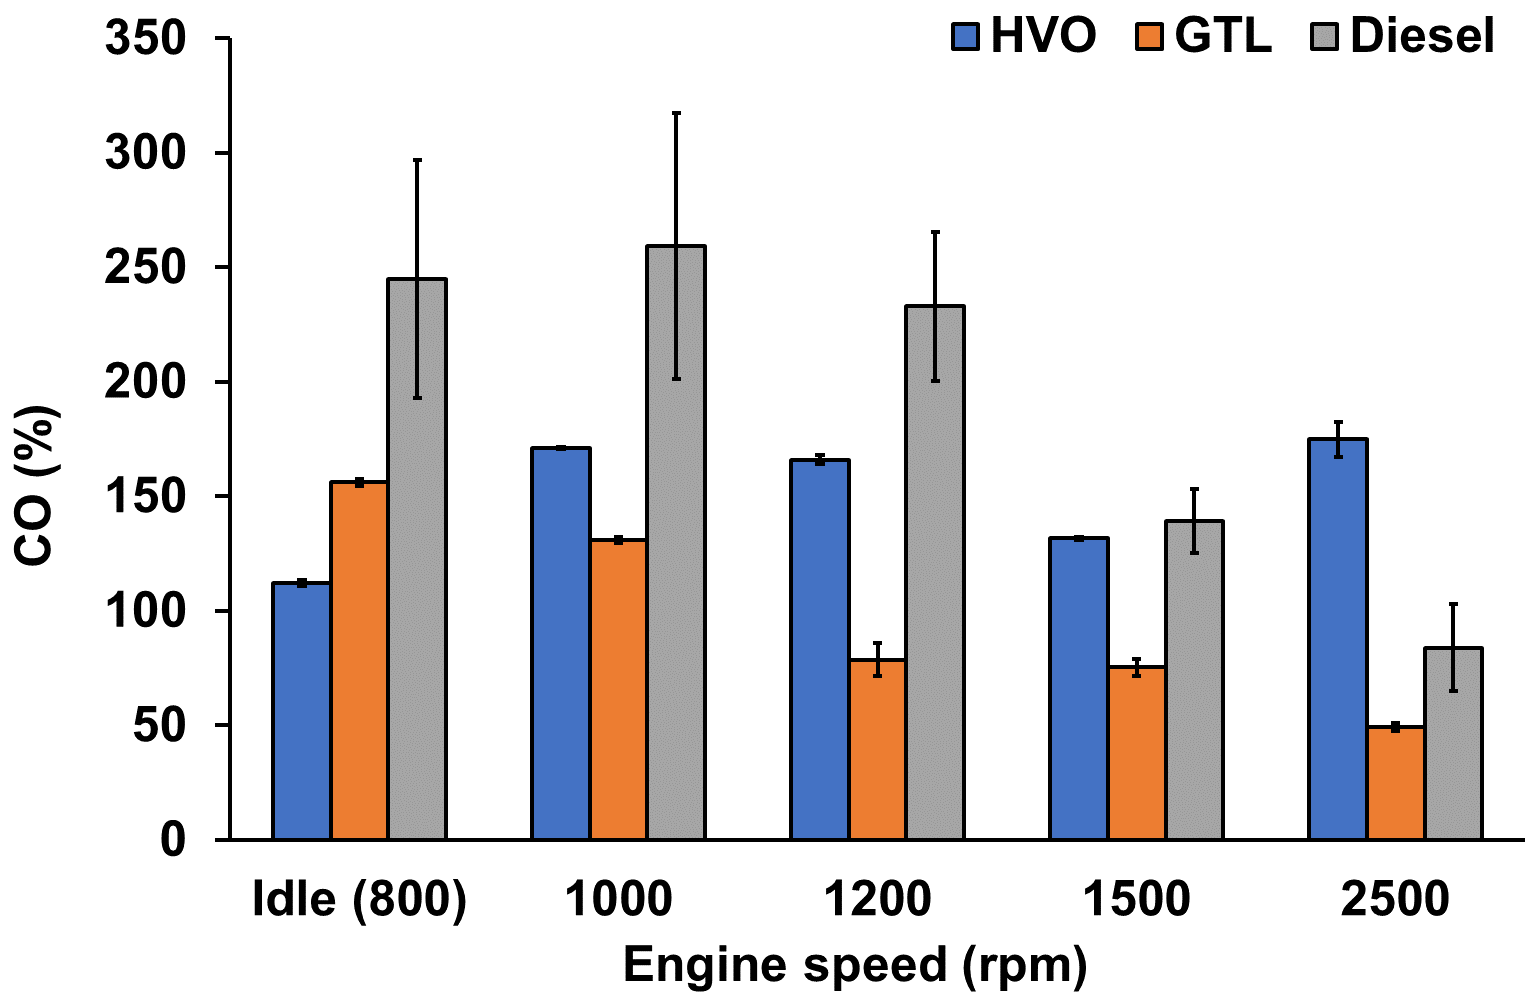 Figure 8 Exhaust gas concentrations of CO (%) from the starboard engine at 5 speed conditions operated on Diesel, GTL, and HVO.